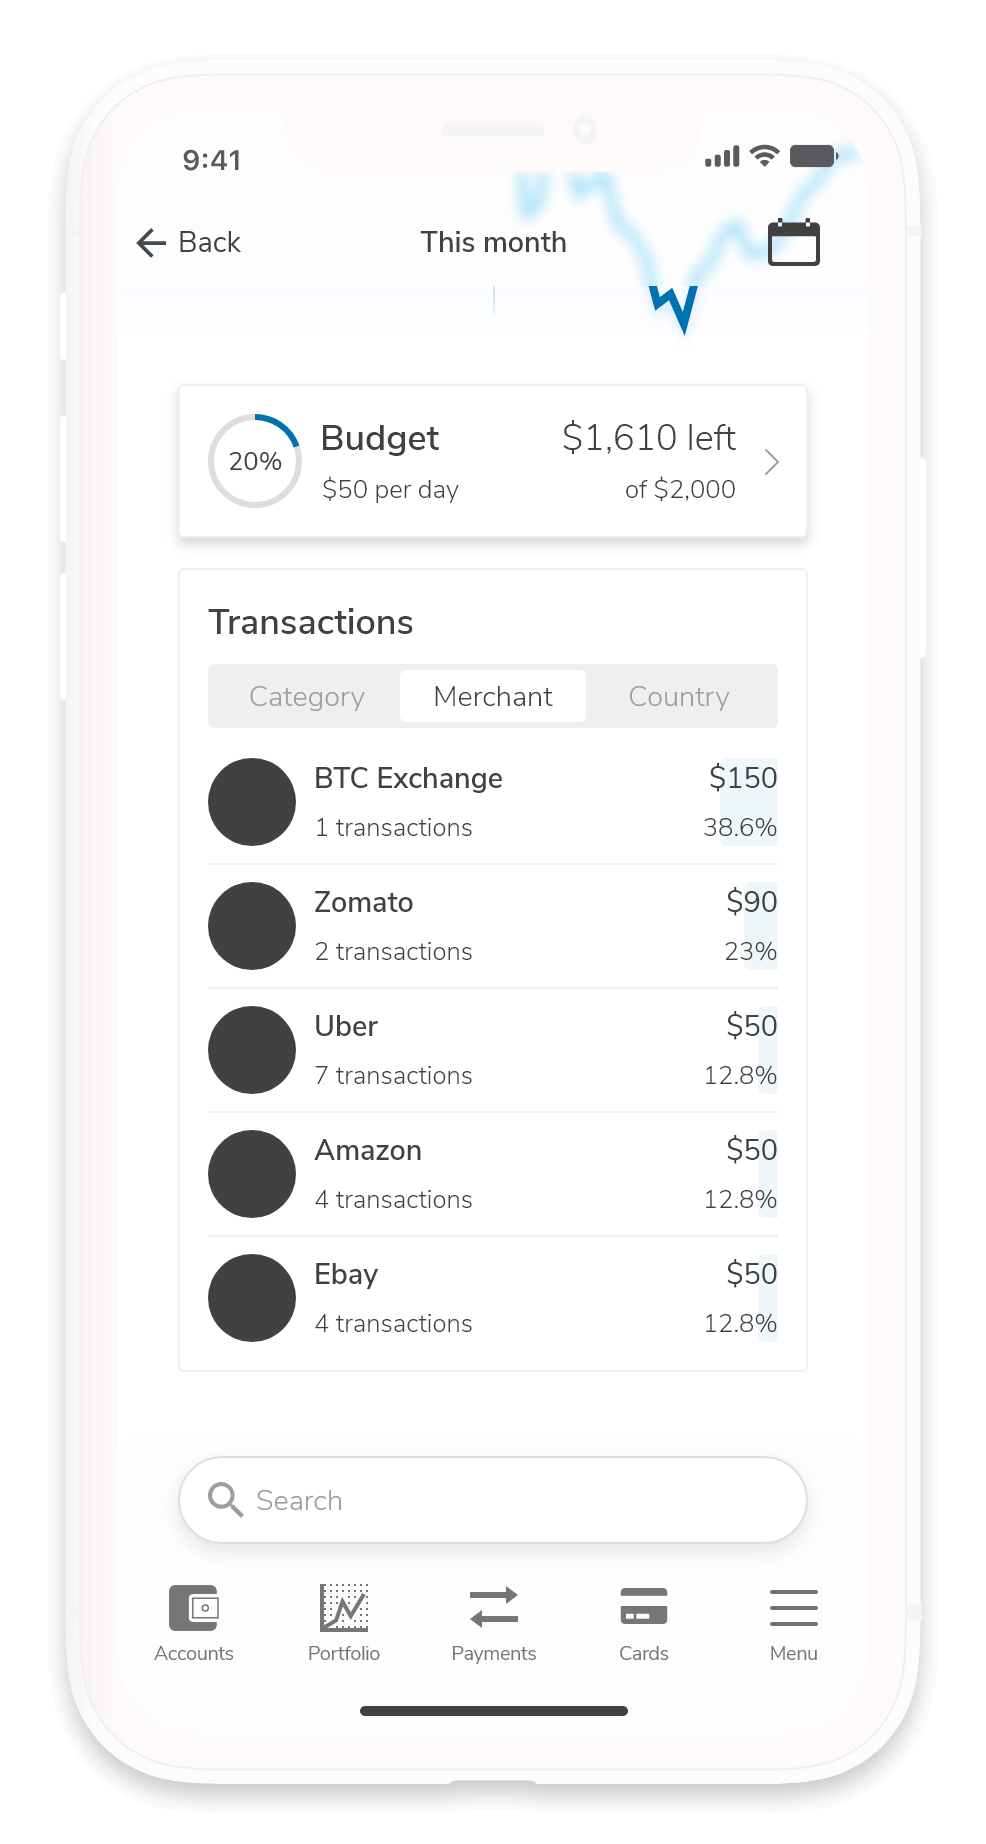 Screenshot of the Transaction analytics categorized by Merchant, users can also track Transaction by Category, and Country.